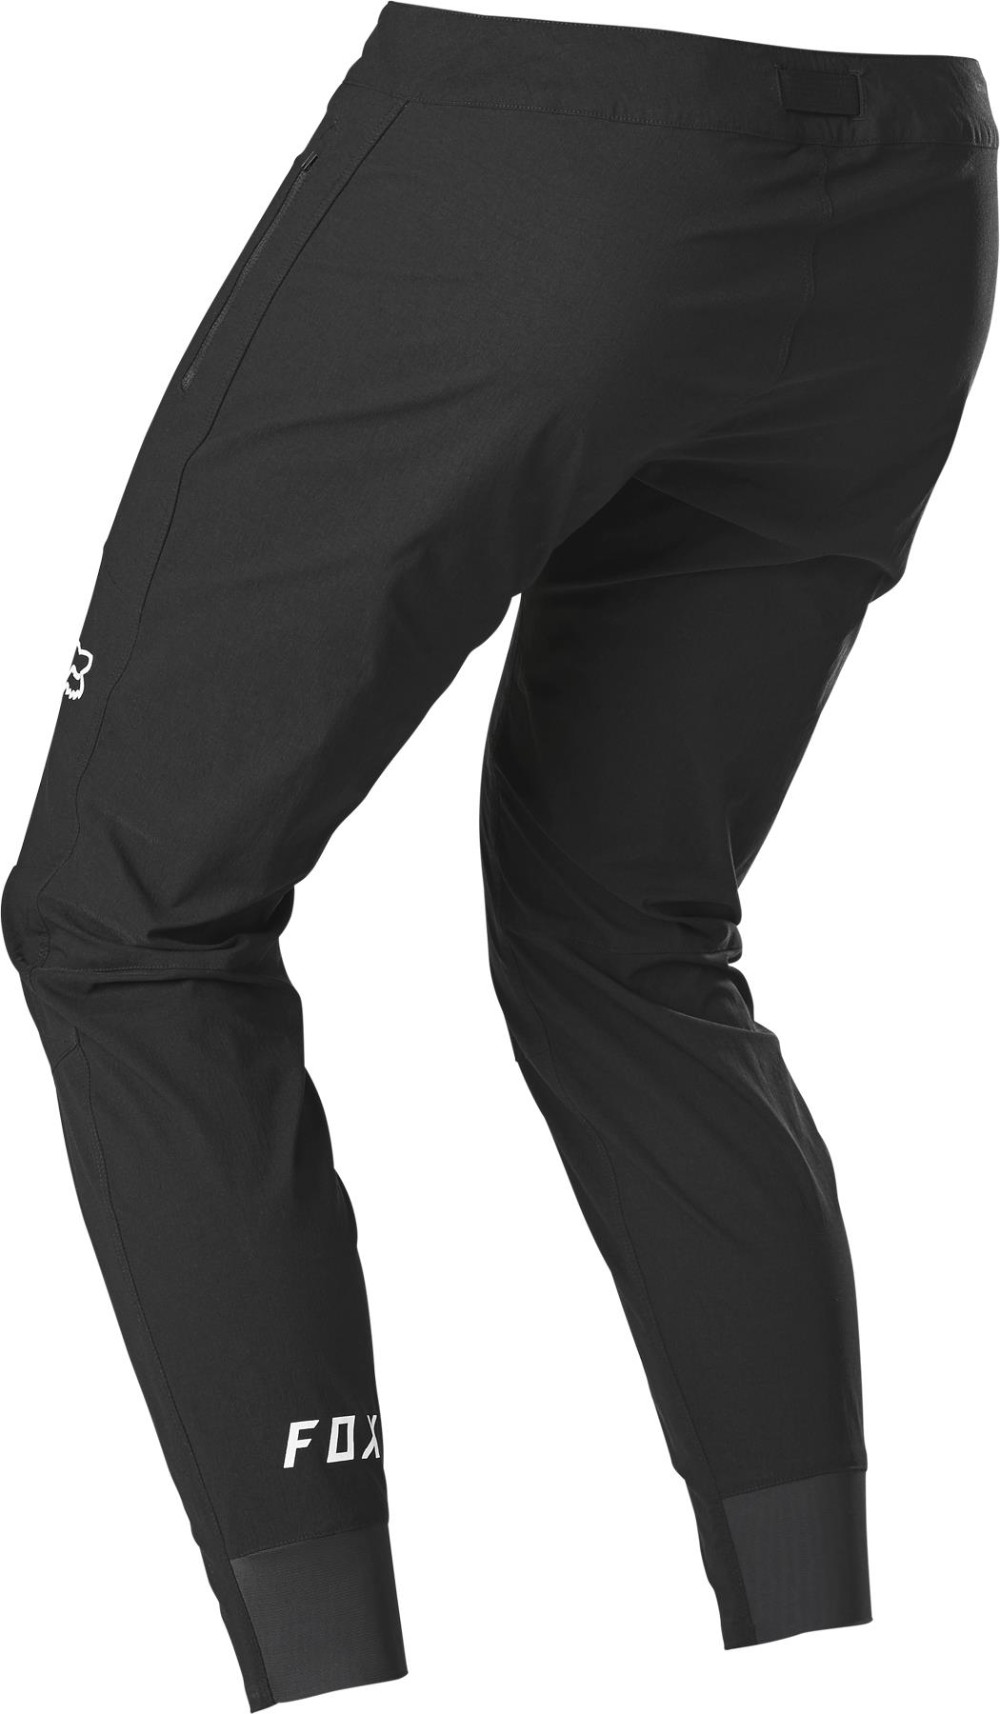 Ranger Youth MTB Cycling Trousers image 1